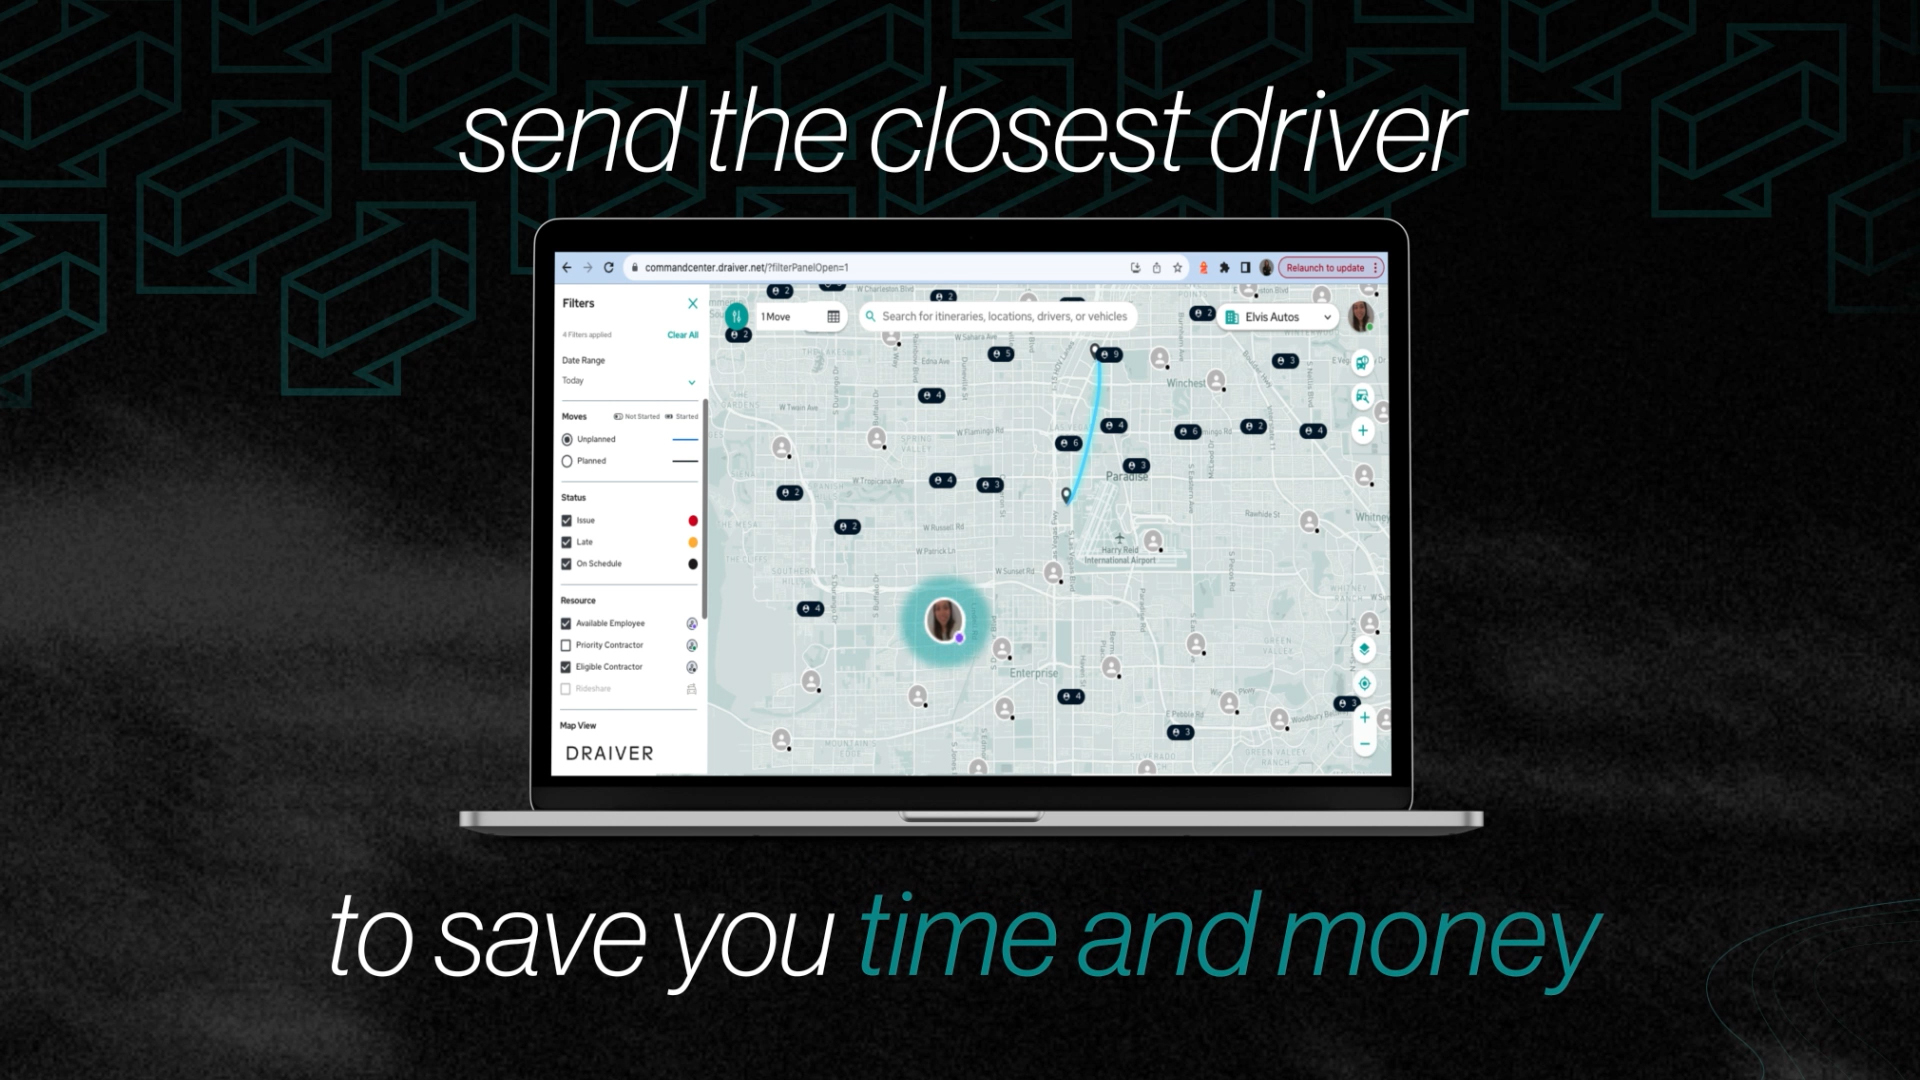 Draiver launches Command Center, a new cutting-edge platform for vehicle movement management that employs advanced AI to navigate routing complexities, optimize trip chaining, and significantly reduce transit times with more efficient vehicle movement combinations.